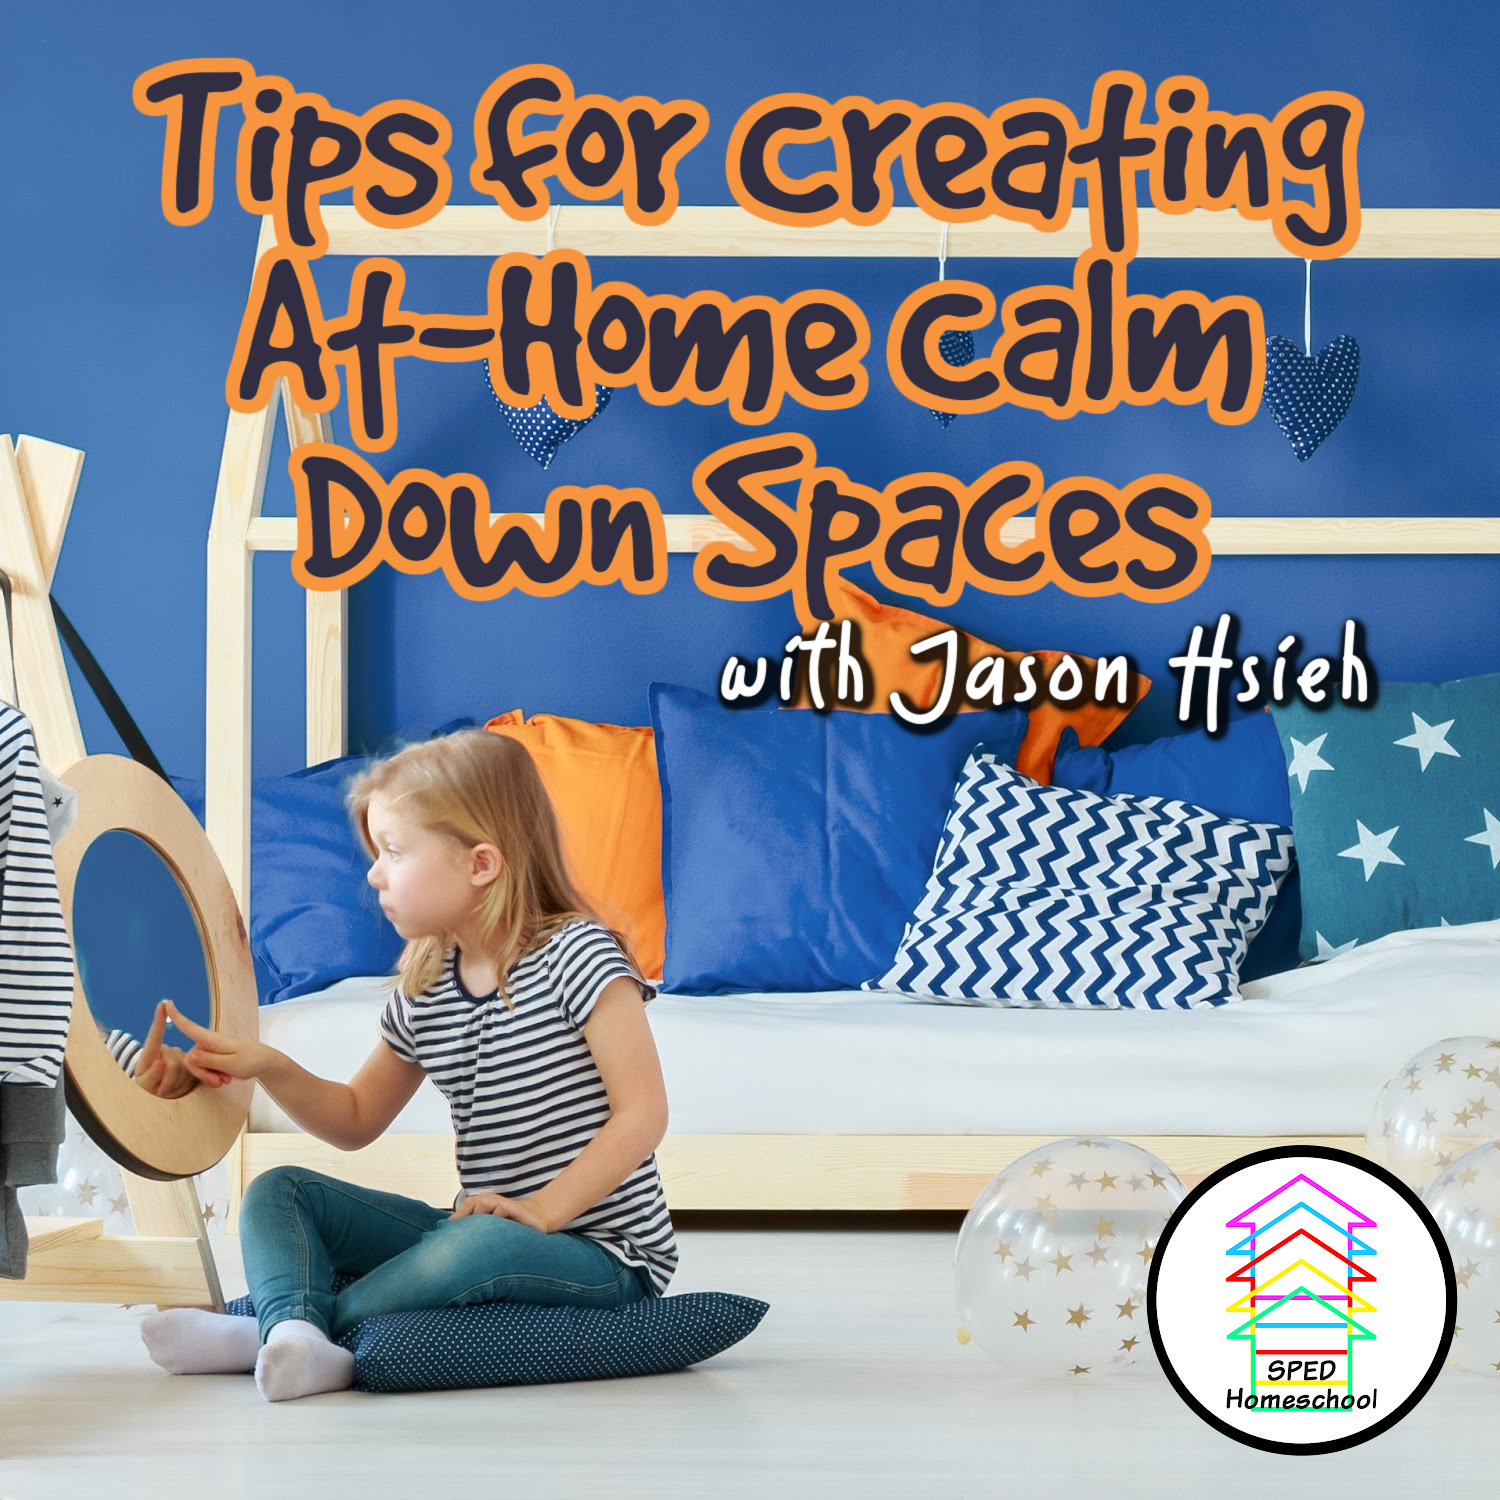 Tips for Creating At-Home Calm Down Spaces